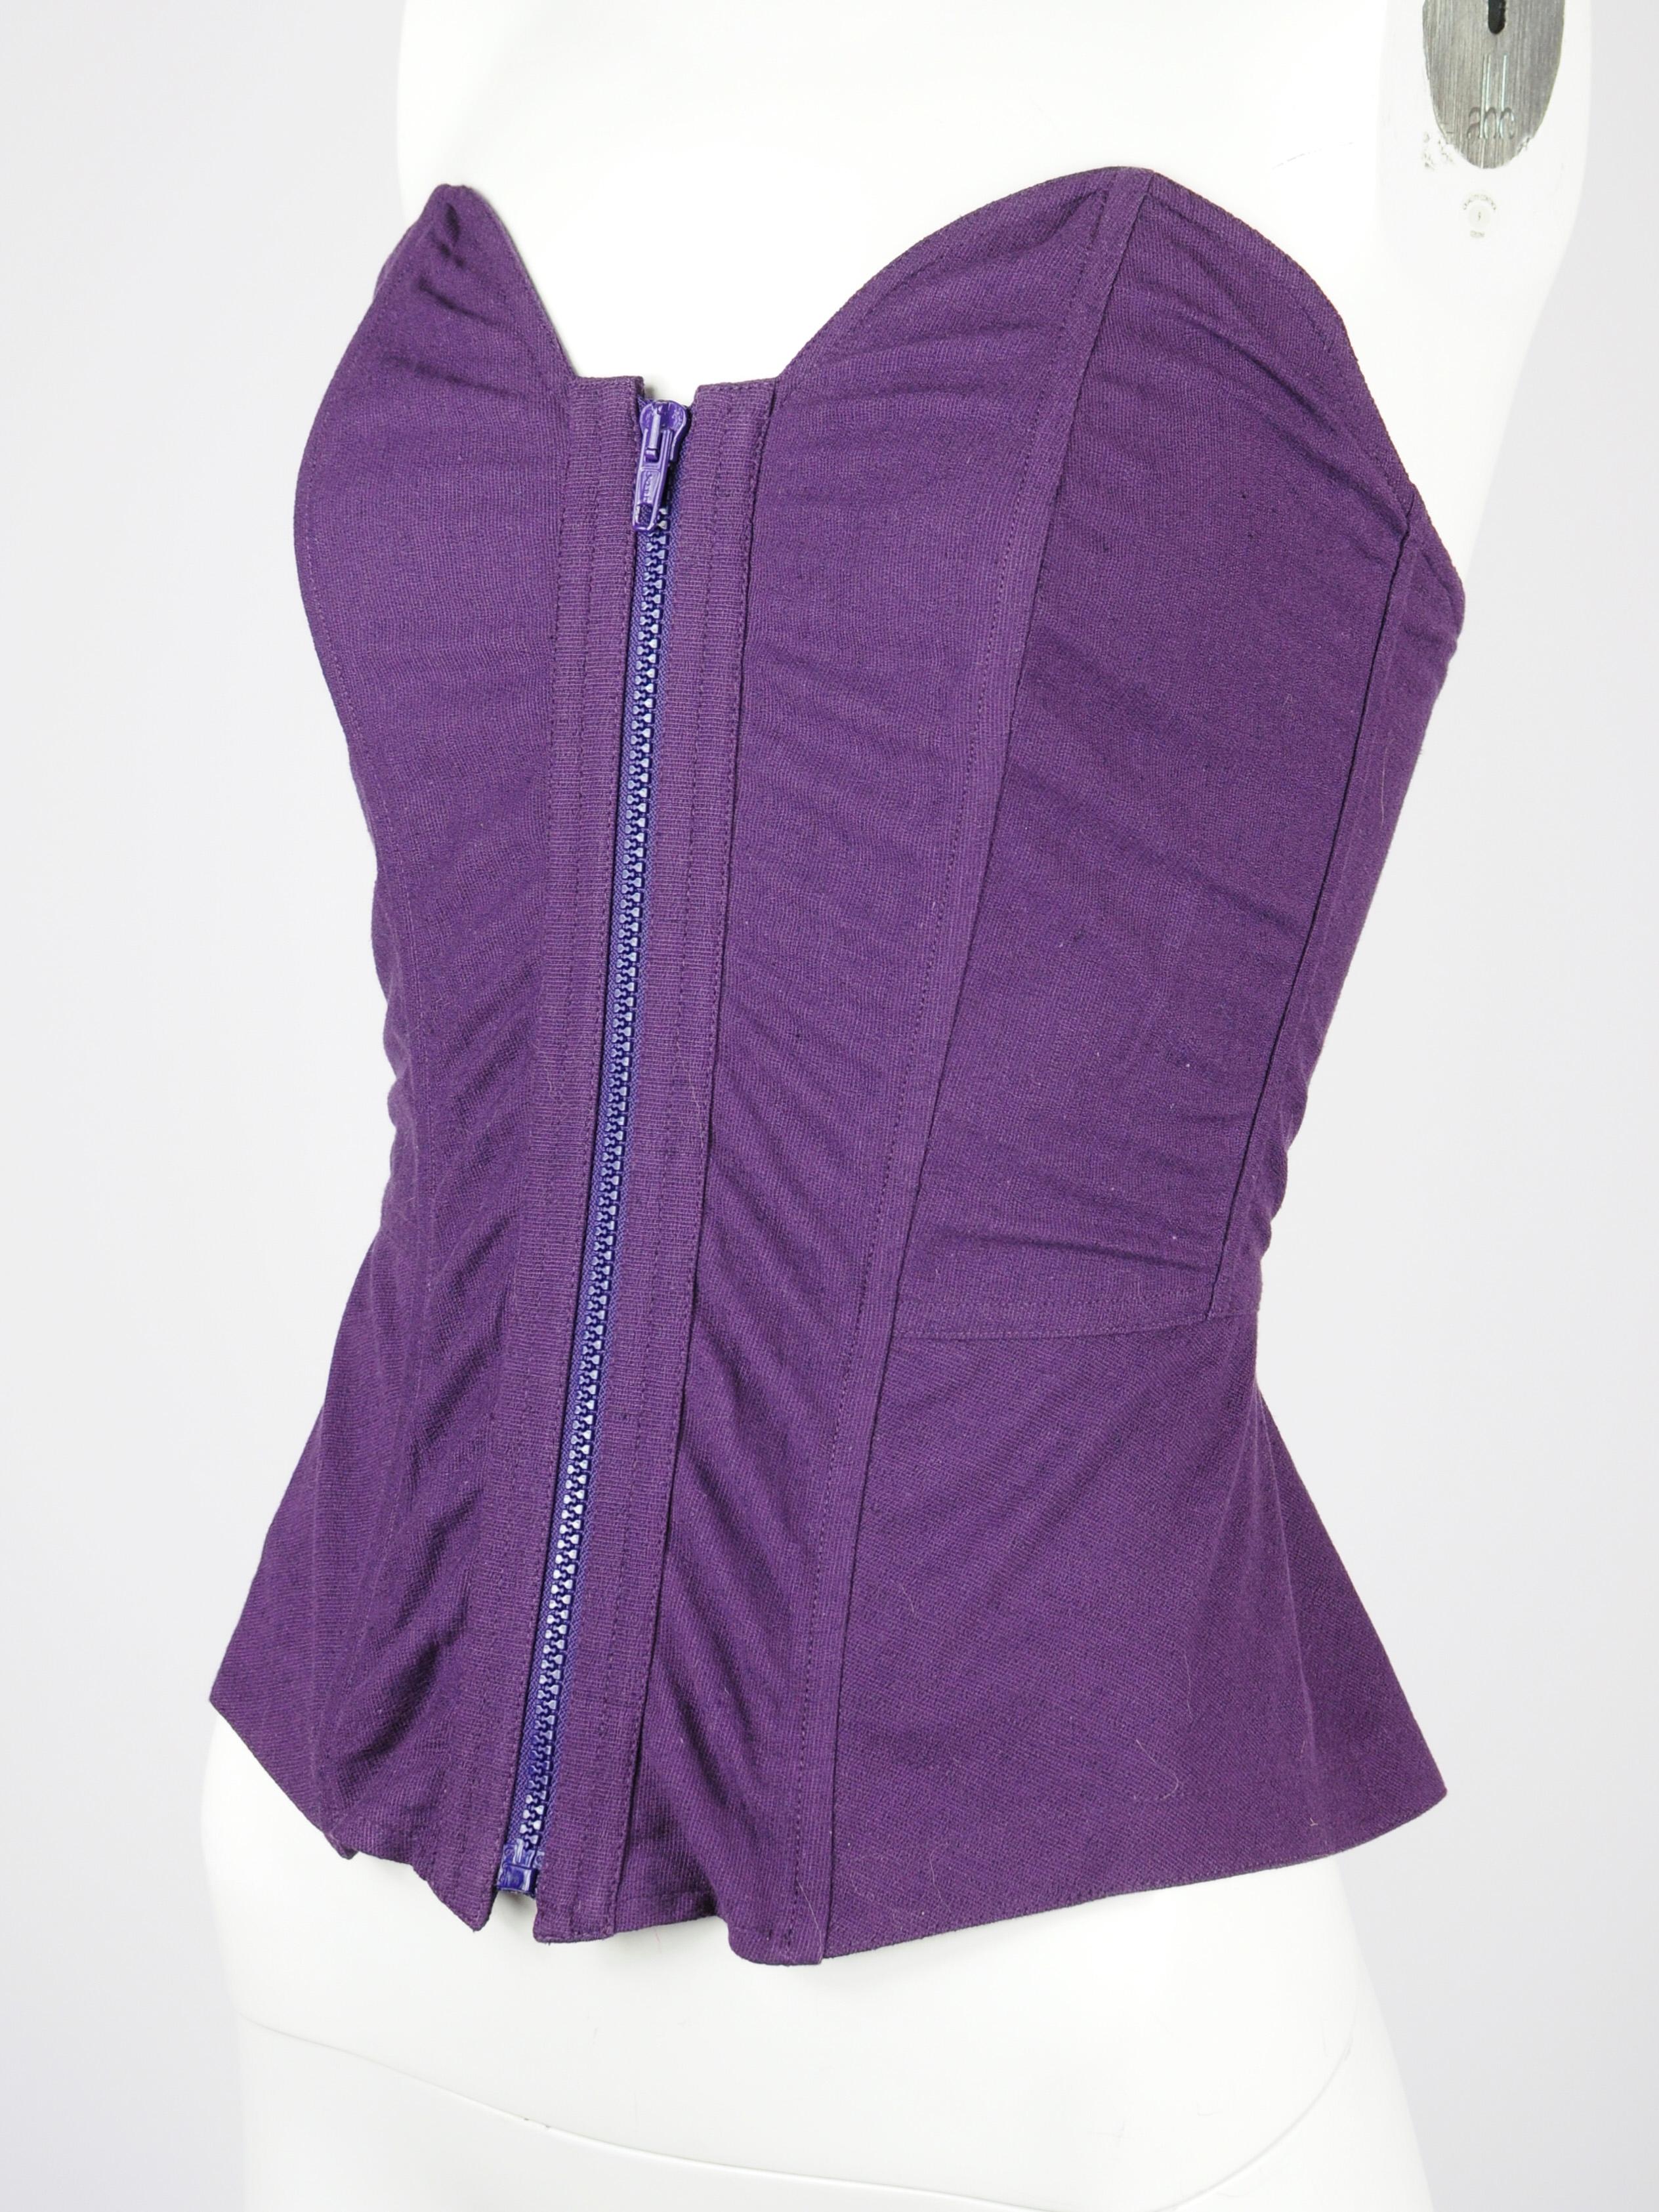 La Perla corset top in purple linen and cotton blend  from the early 1990s. This La Perla corset is deadstock, meaning it is new with tags and has never been worn before. It is reinforced with boning. The zipper opens all the way so it’s easy to put